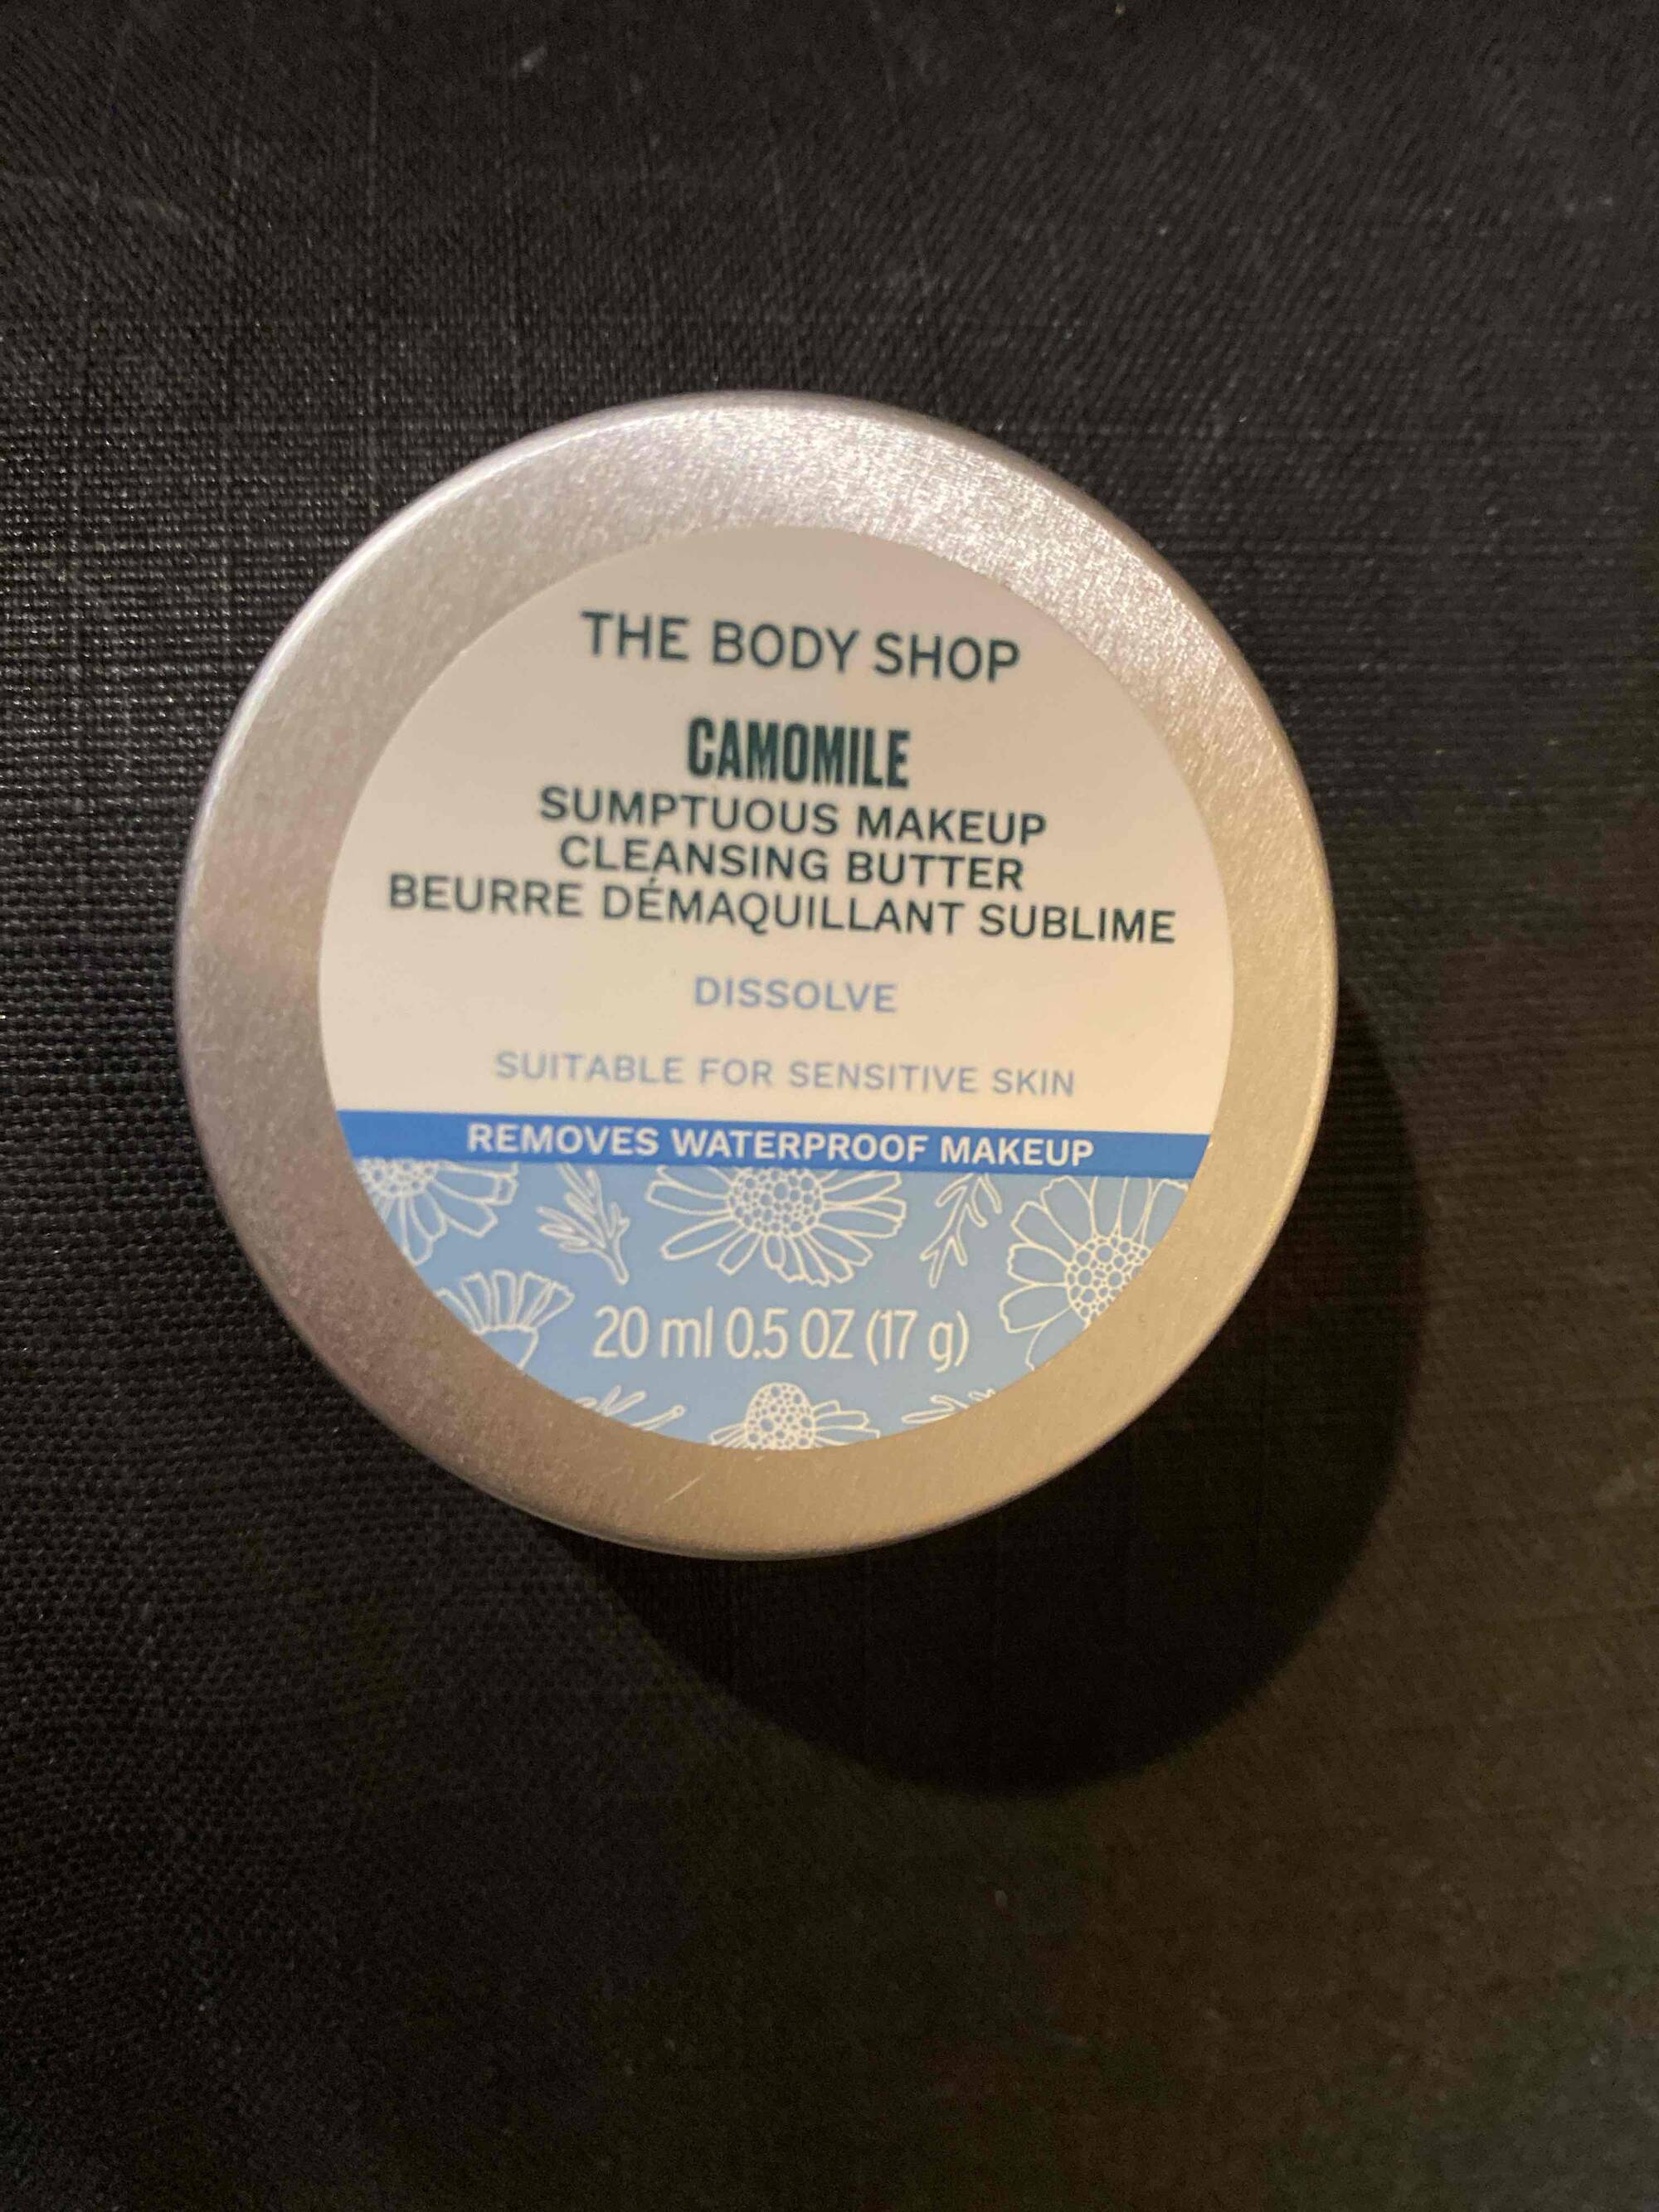 THE BODY SHOP - Cacomile - Beurre démaquillant